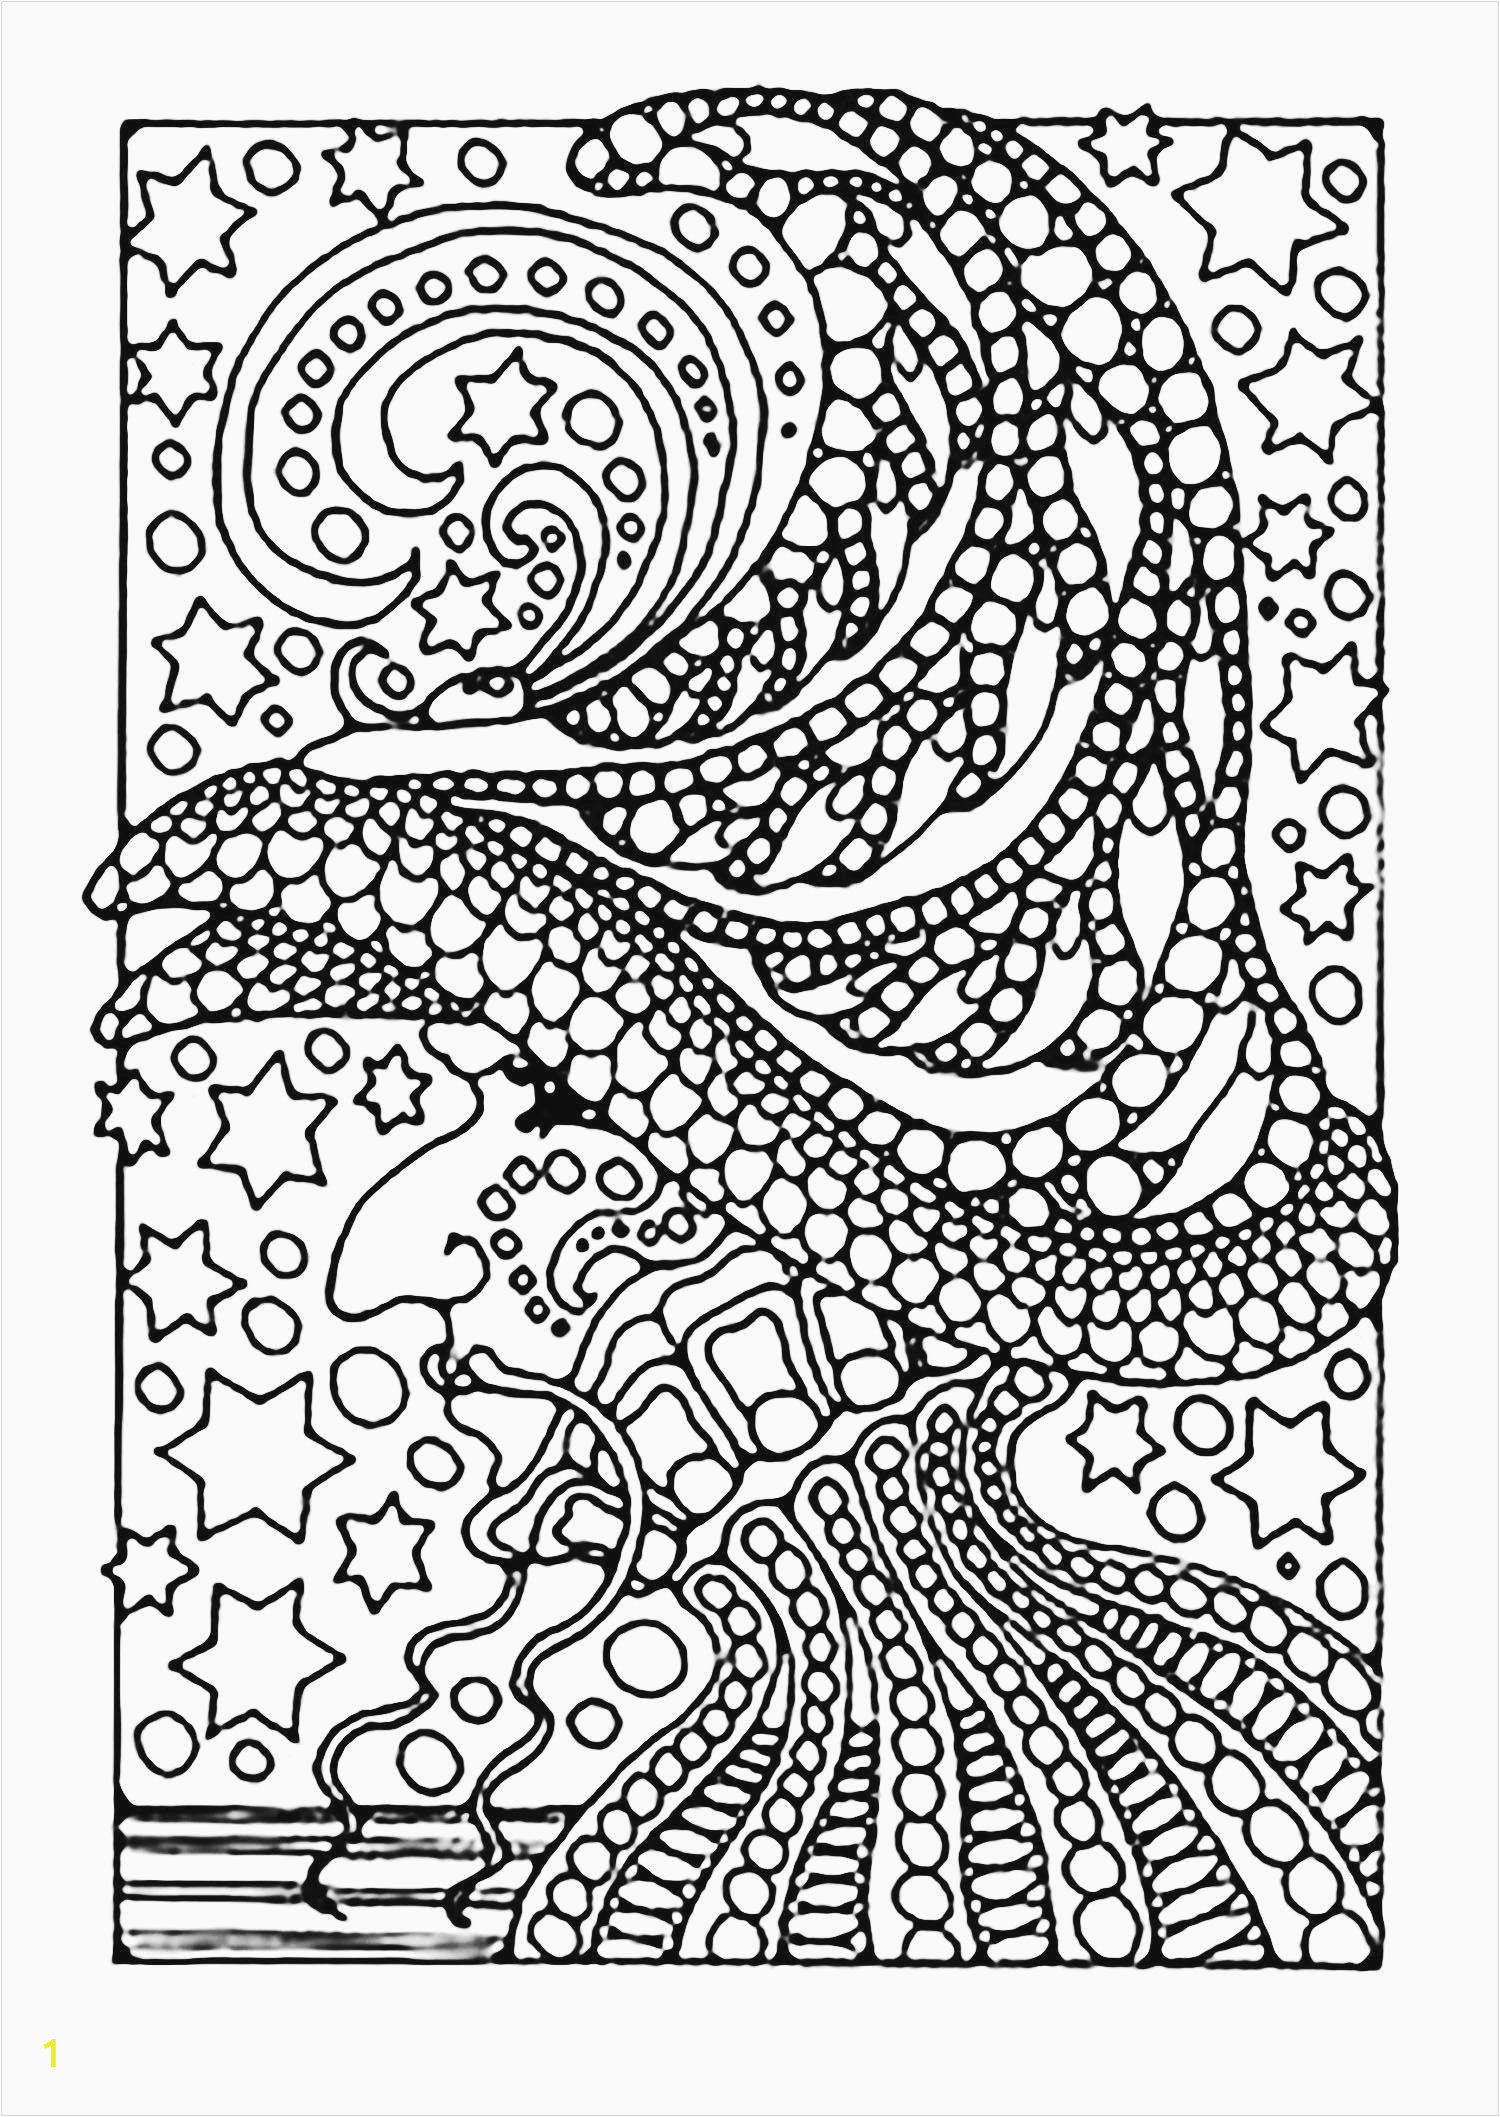 Coloring Pages to Color Online for Free for Adults Free Coloring Line for Adults